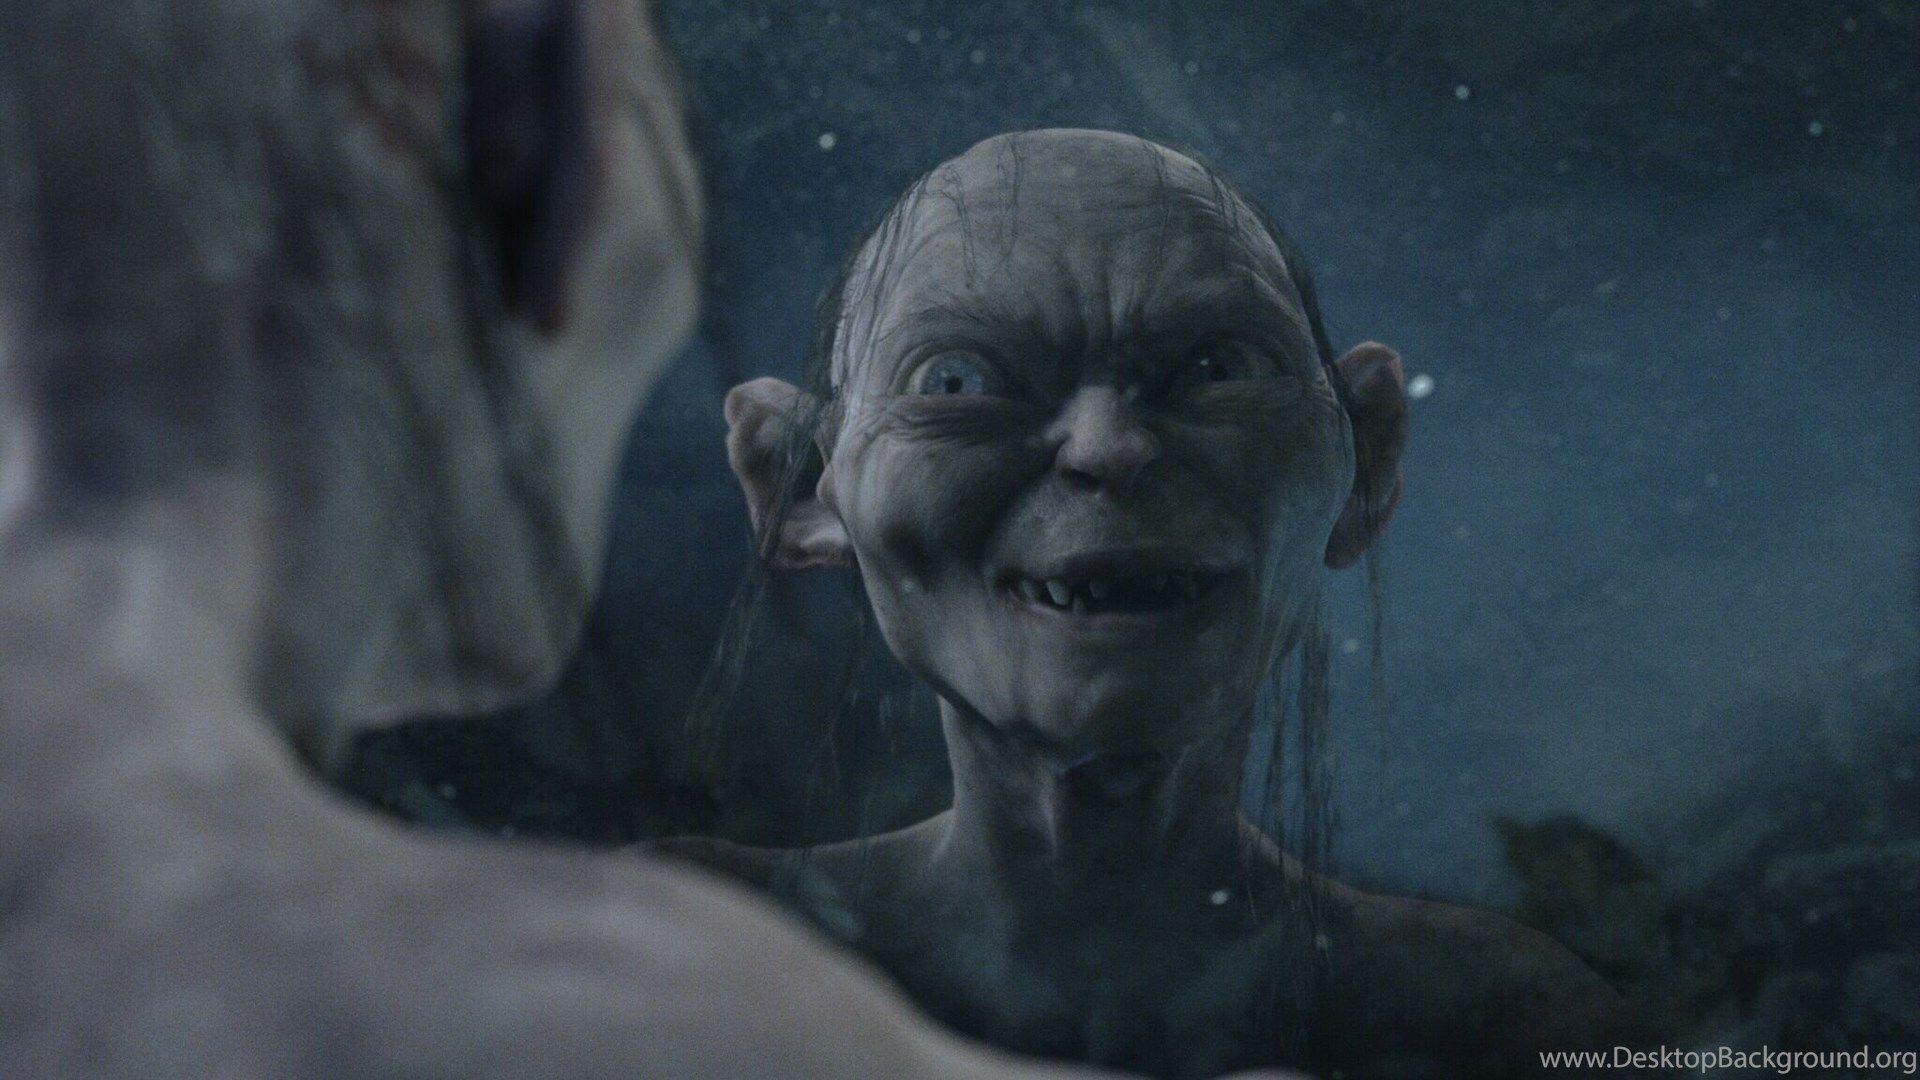 Gollum Lord Of The Rings Wallpaper 46608 Desktop Background